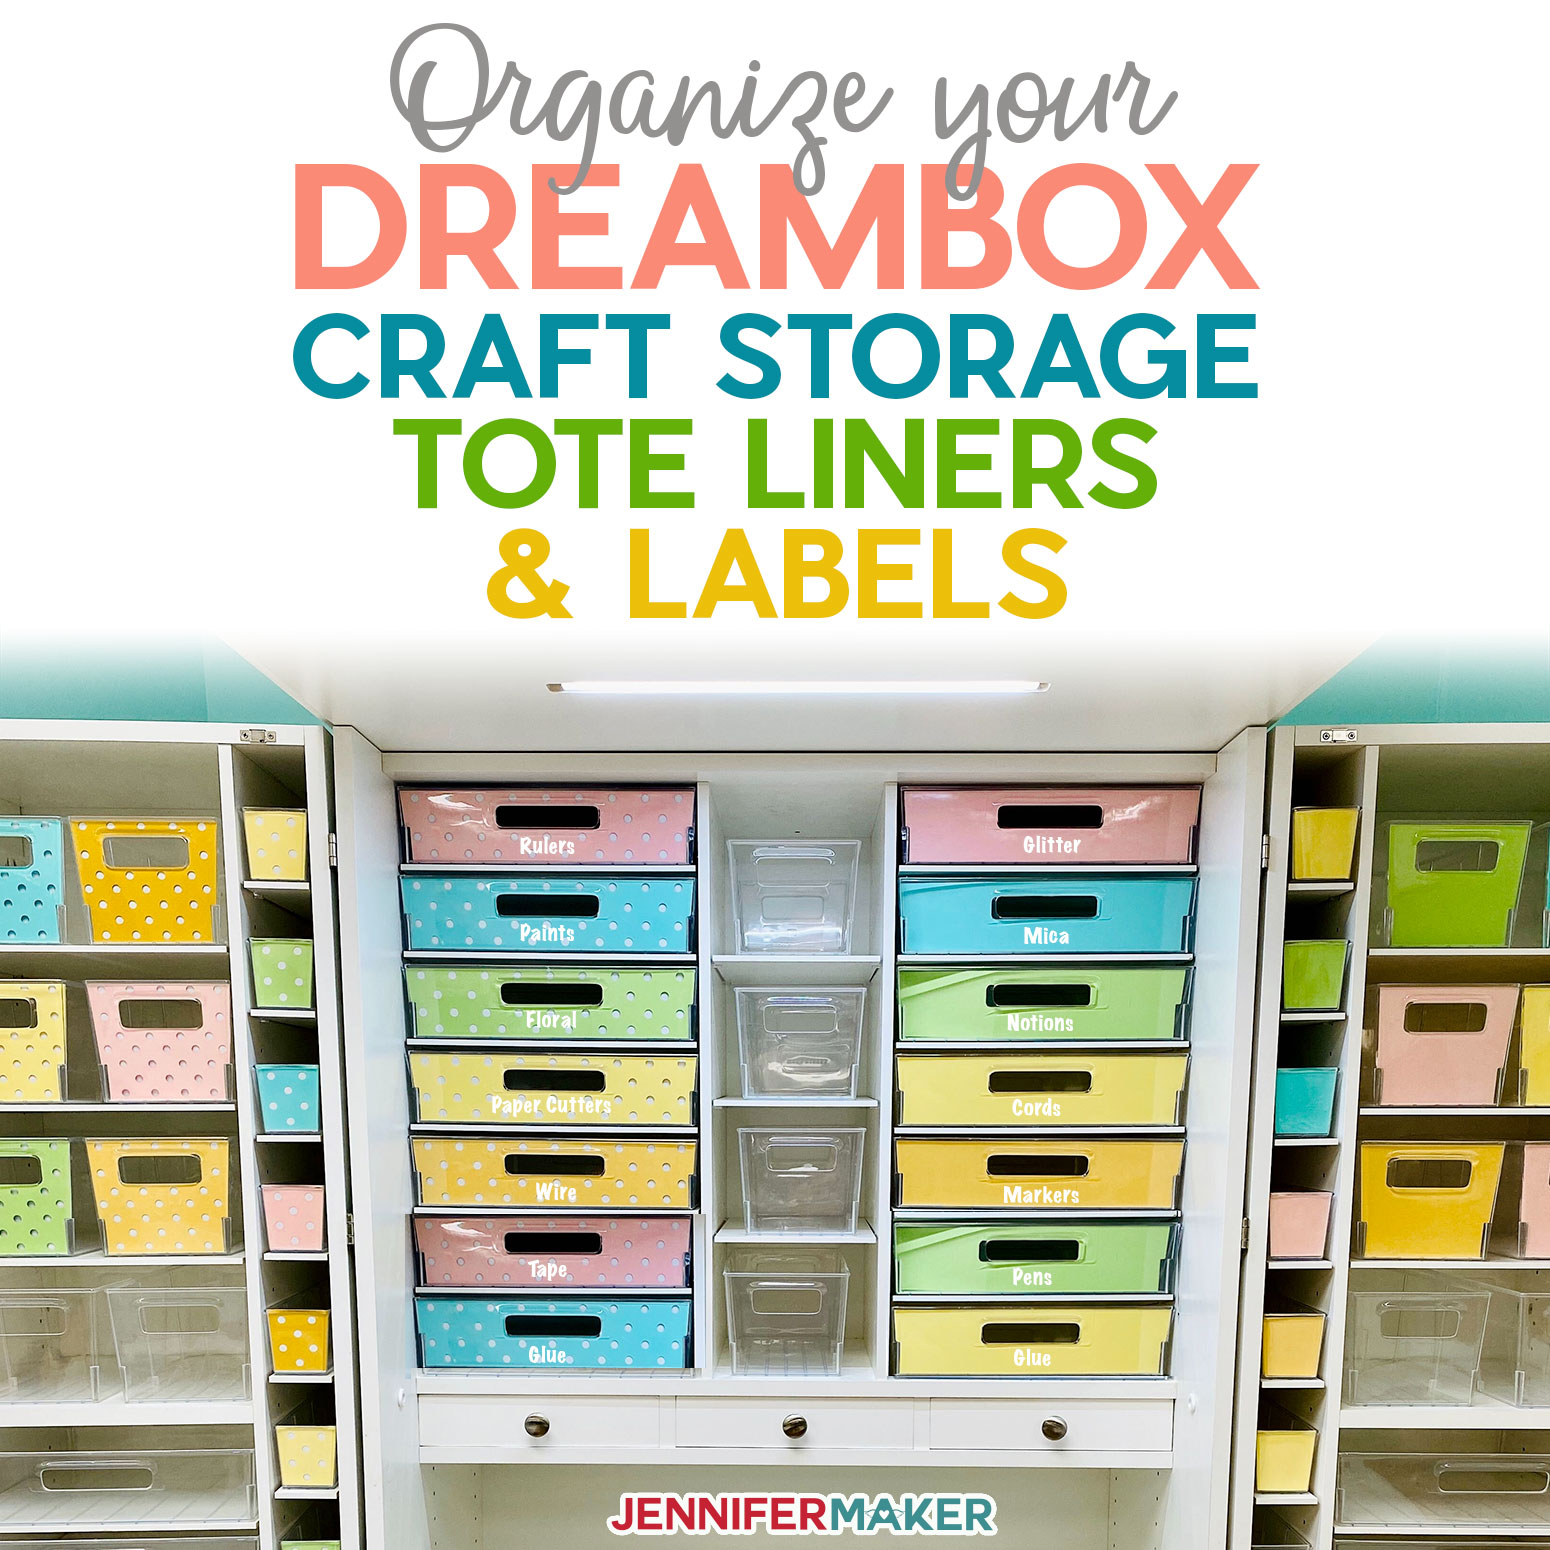 DreamBox Craft Storage Tote Liners & Labels